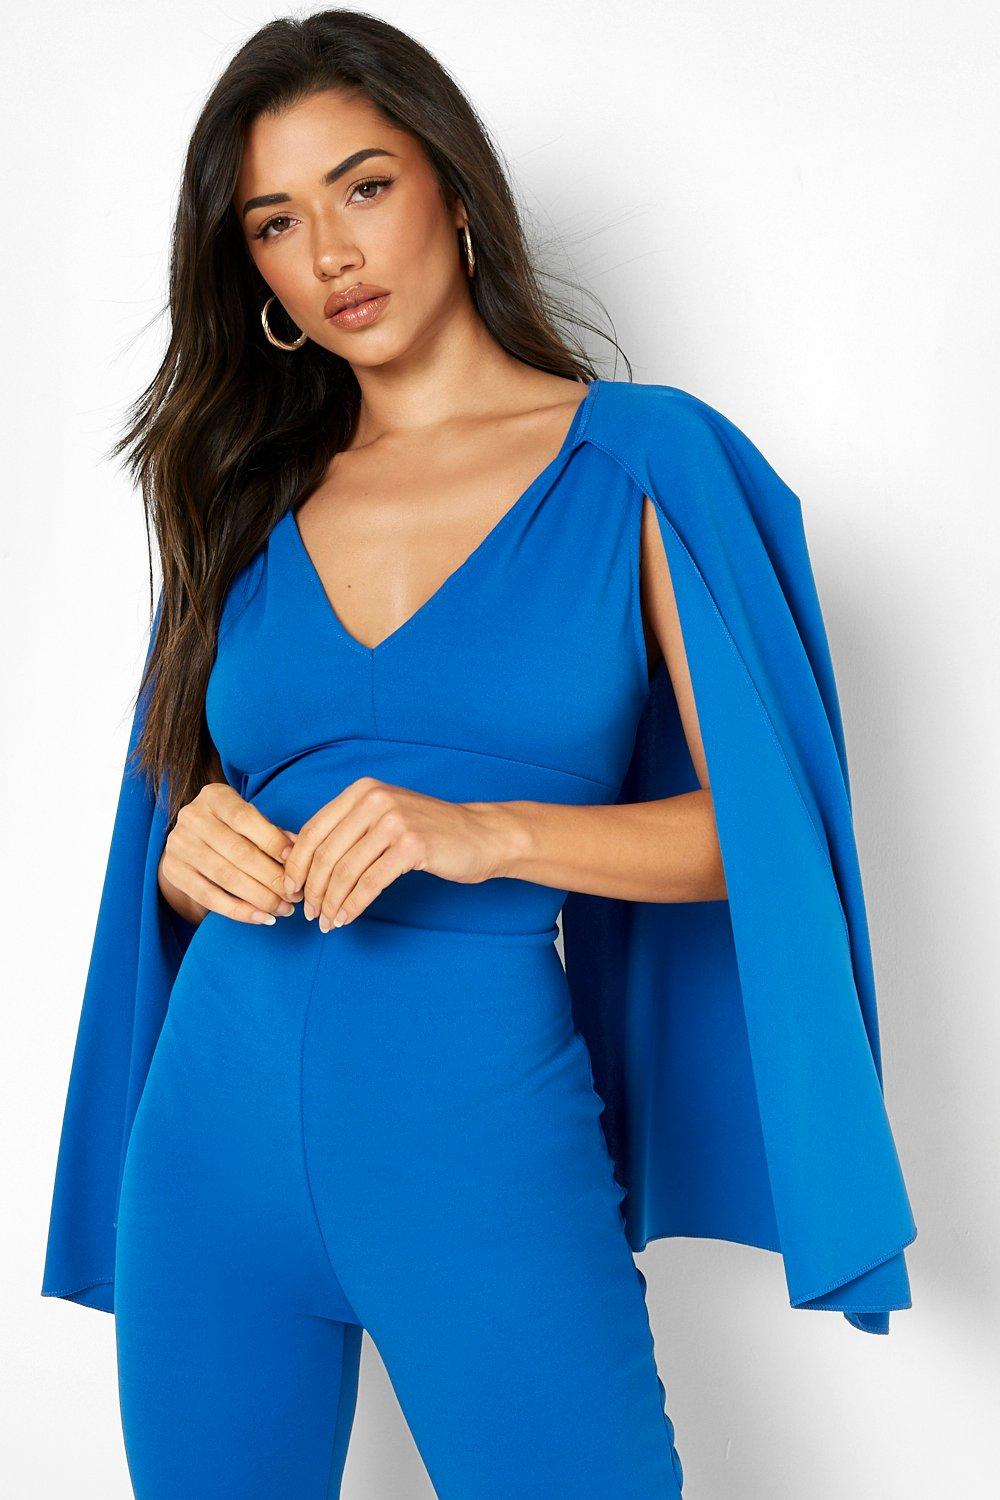 Royal Blue Plunging Neck Jumpsuit With Sleeves